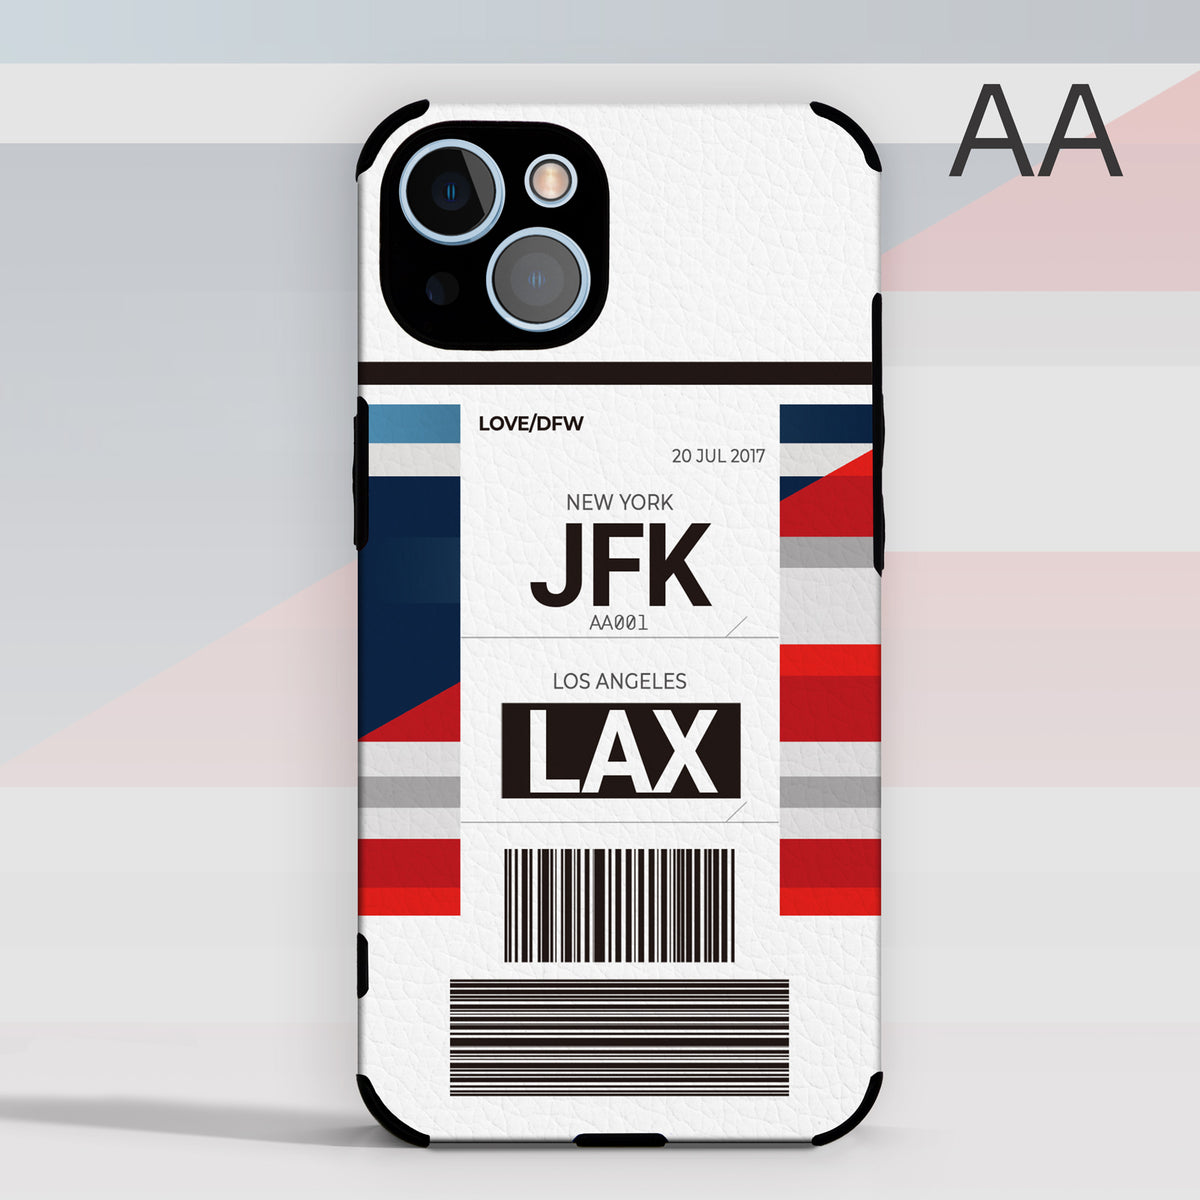 AA American Airlines color Plane Baggage Ticket gift for aviation geeks crew pilot apple iphone huawei samsung xiaomi